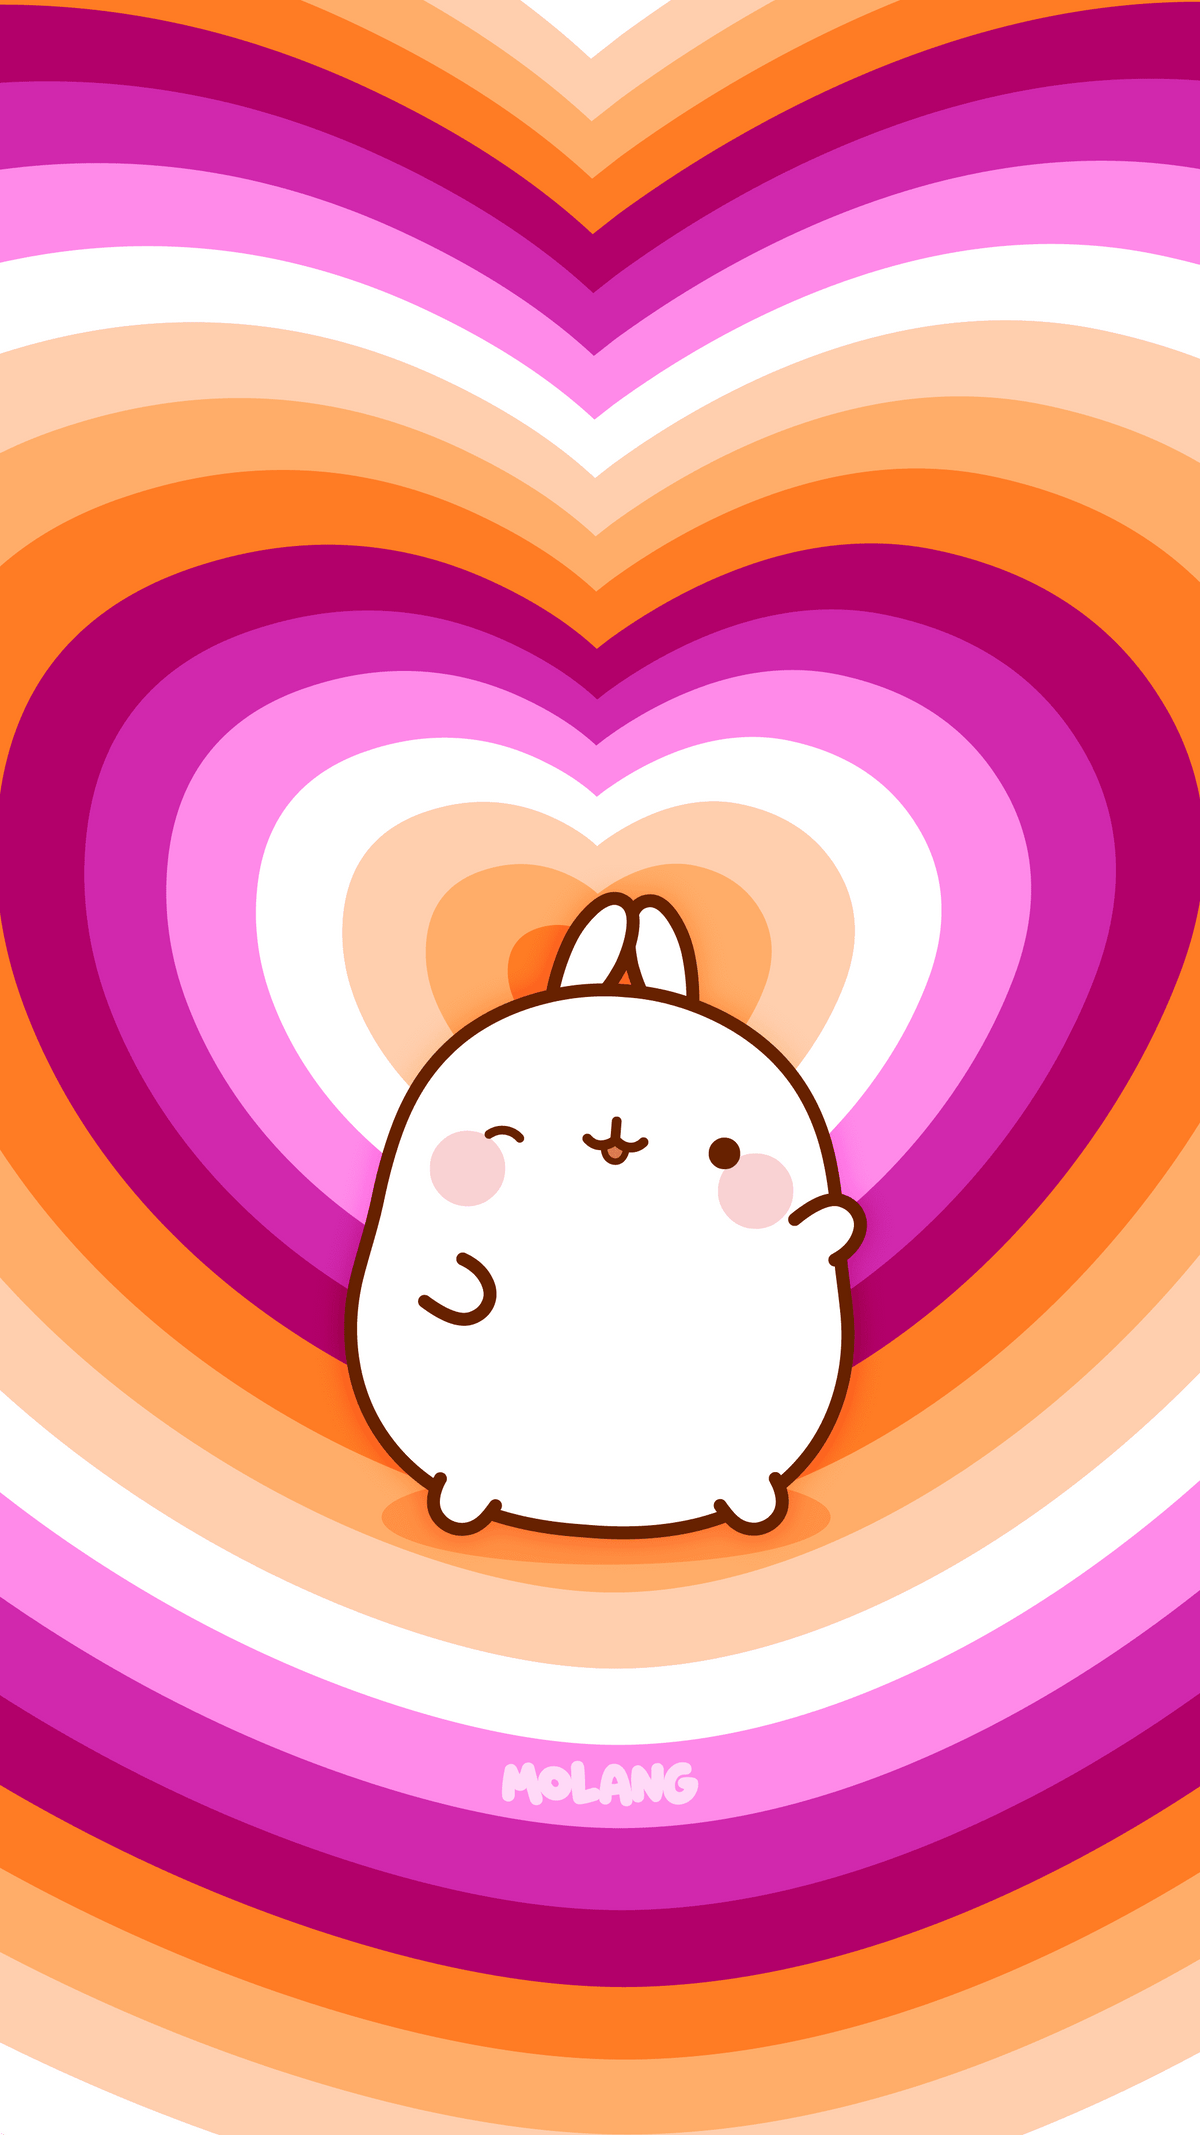 Molang Pride Month Wallpaper: Discover The 5th Rainbow Wallpaper of Molang